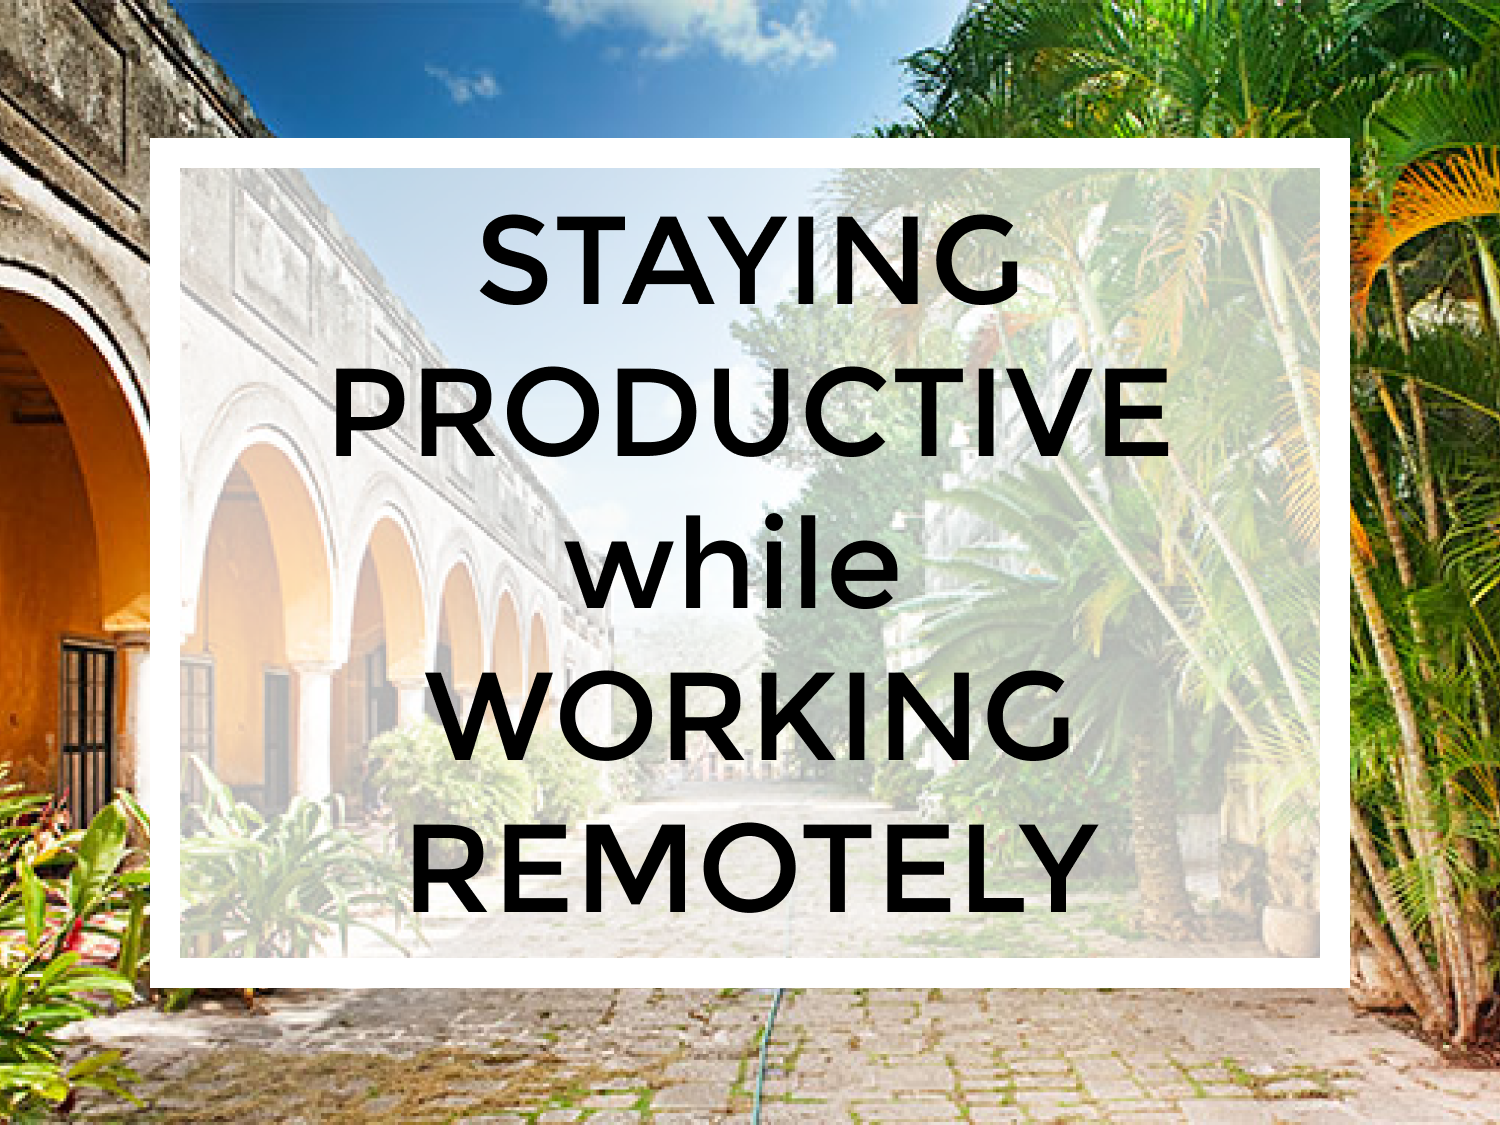 Tips for Staying Productive while Working Remotely